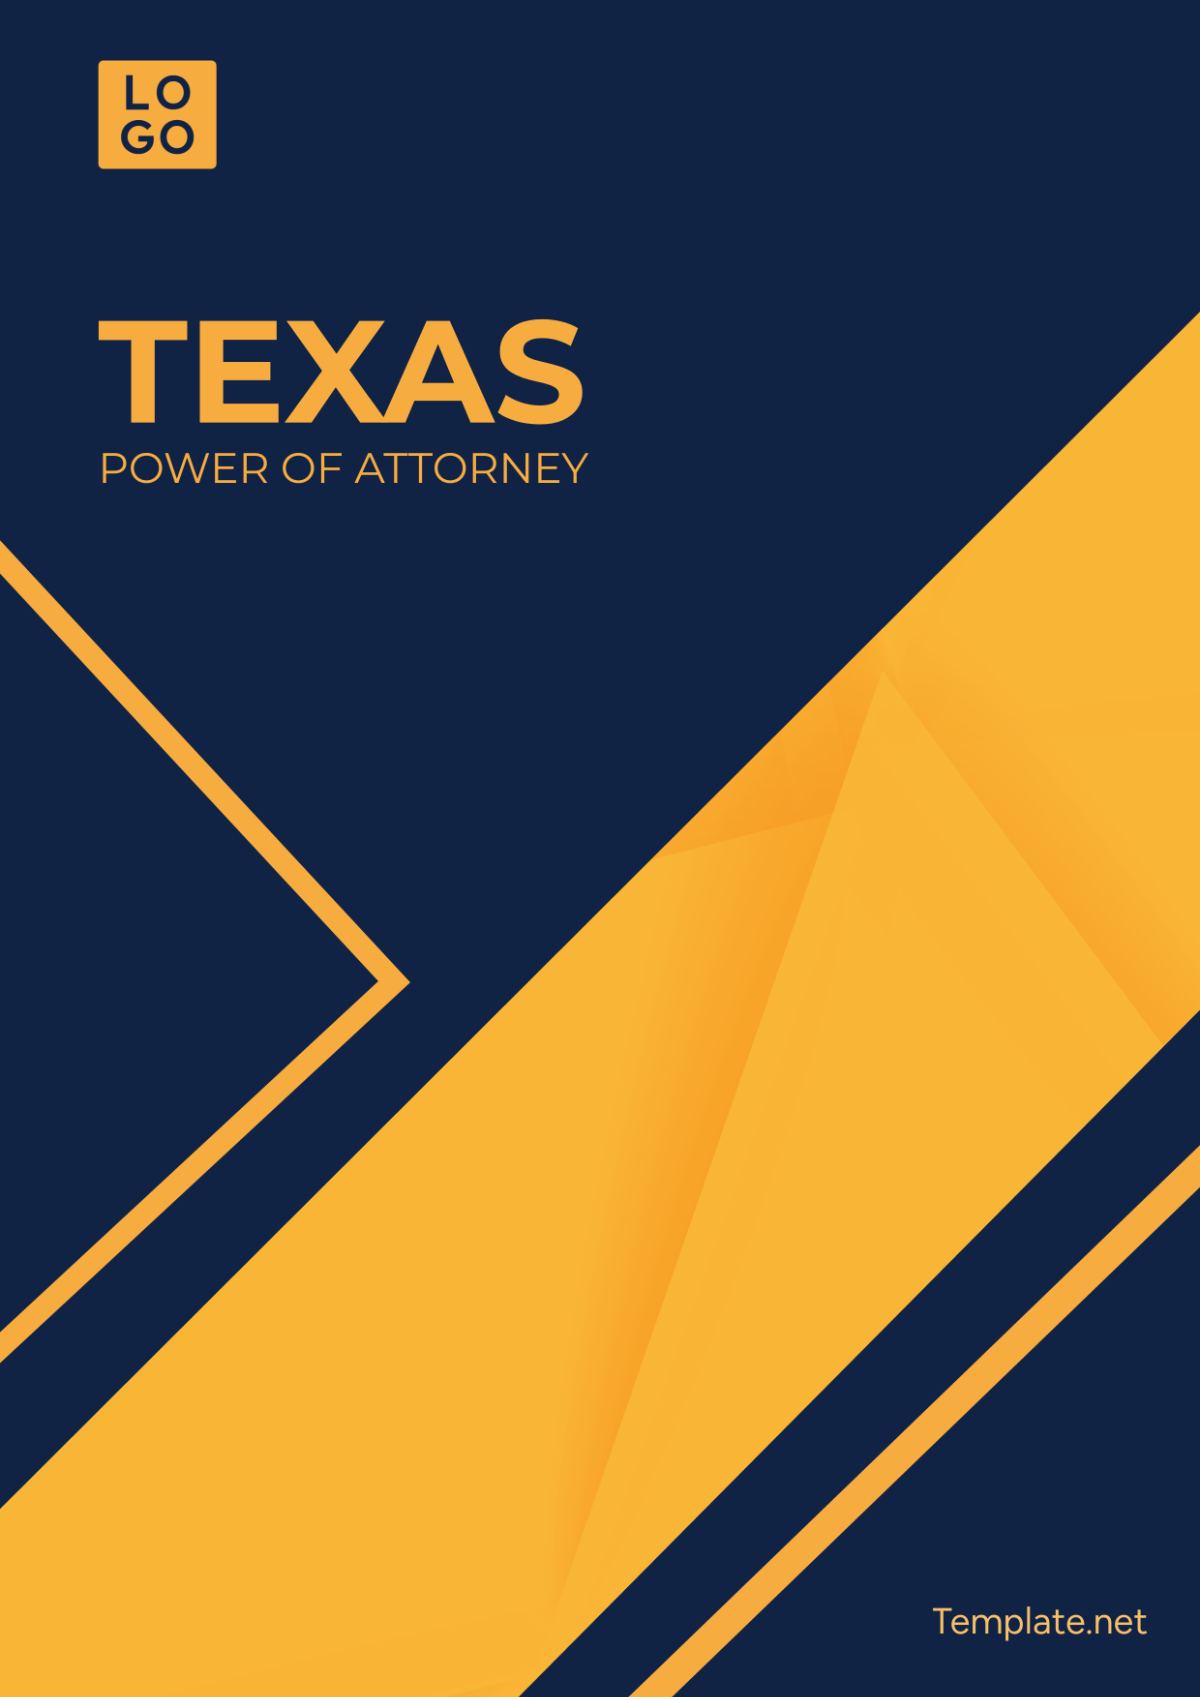 Texas Power of Attorney Template